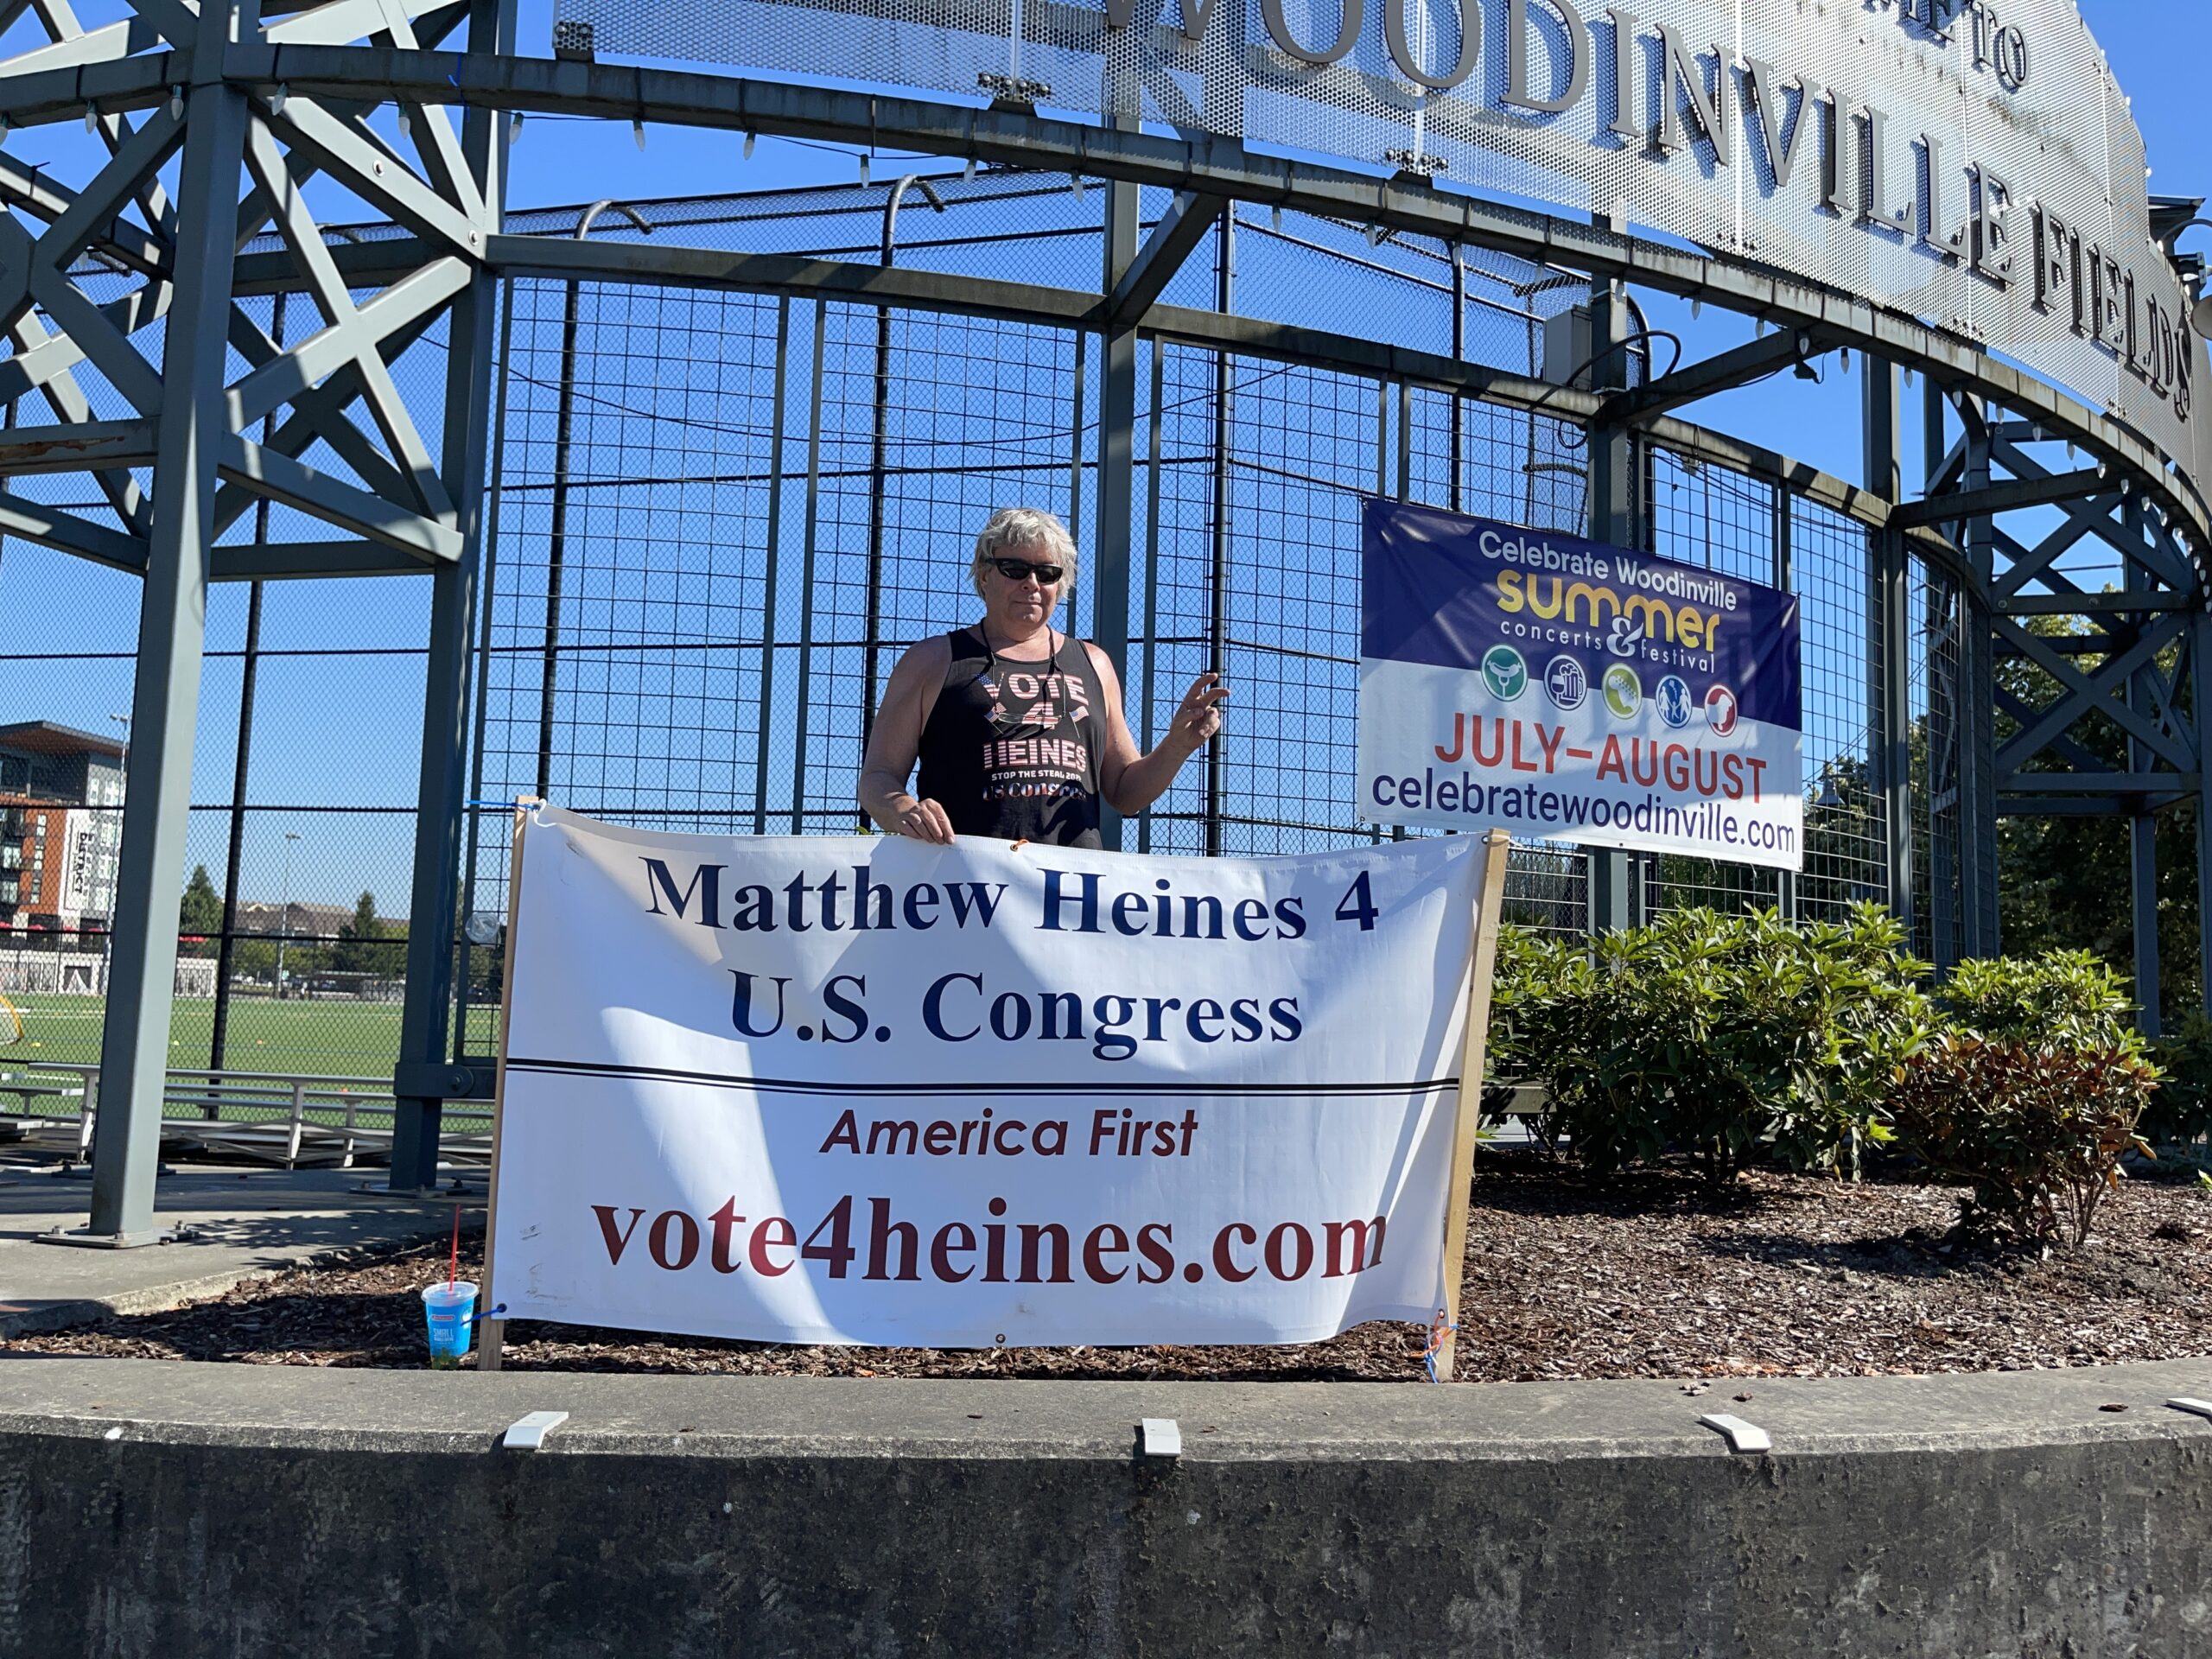 Matthew Heines on the Campaign Trail in Woodinville